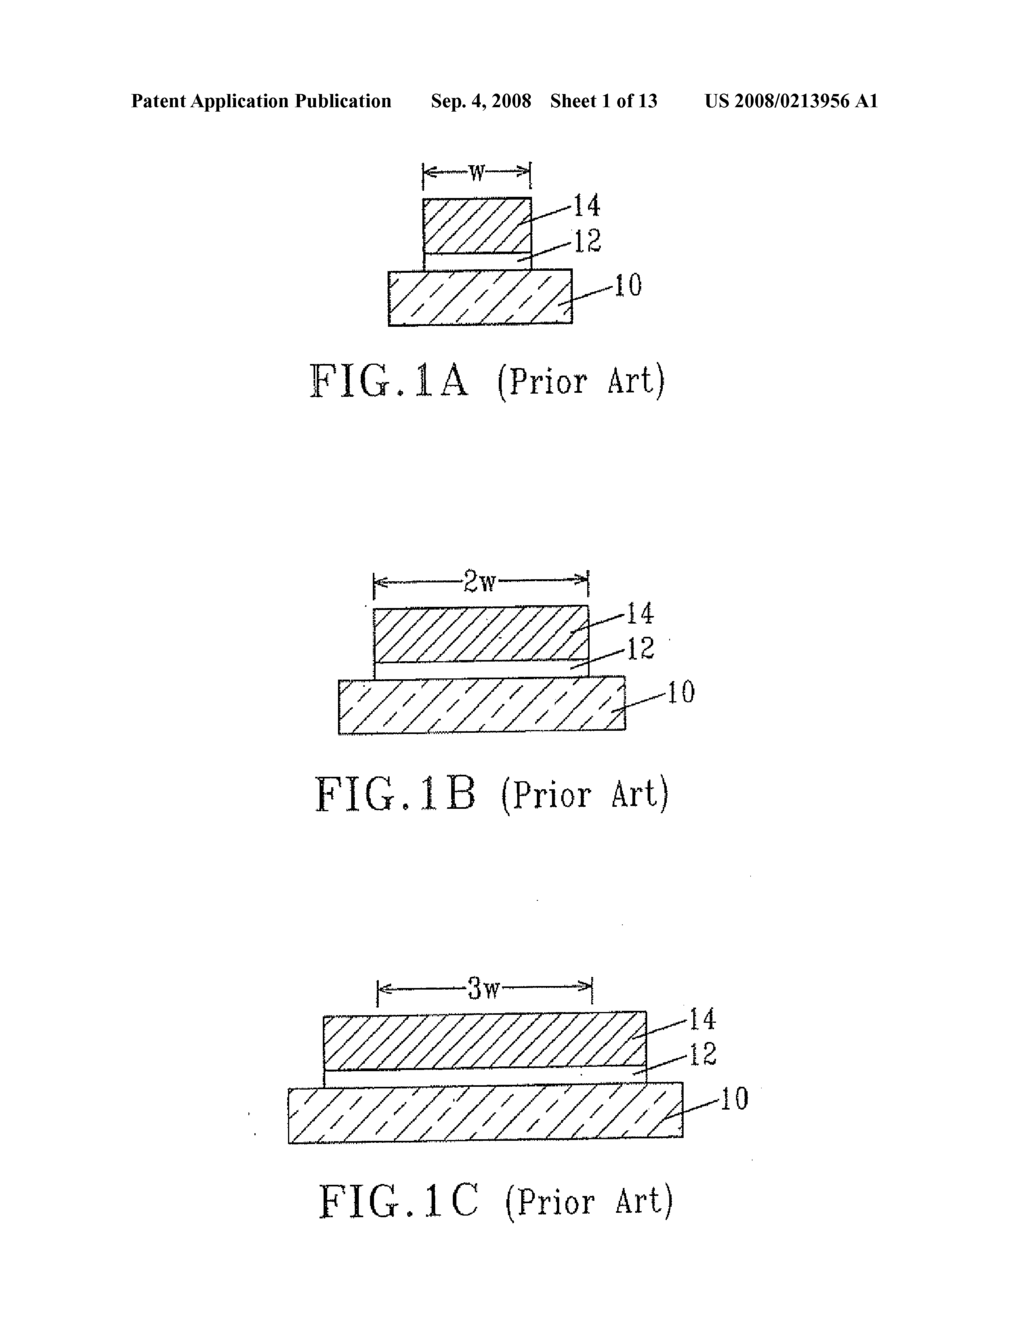 FIELD EFFECT TRANSISTOR DEVICE INCLUDING AN ARRAY OF CHANNEL ELEMENTS - diagram, schematic, and image 02